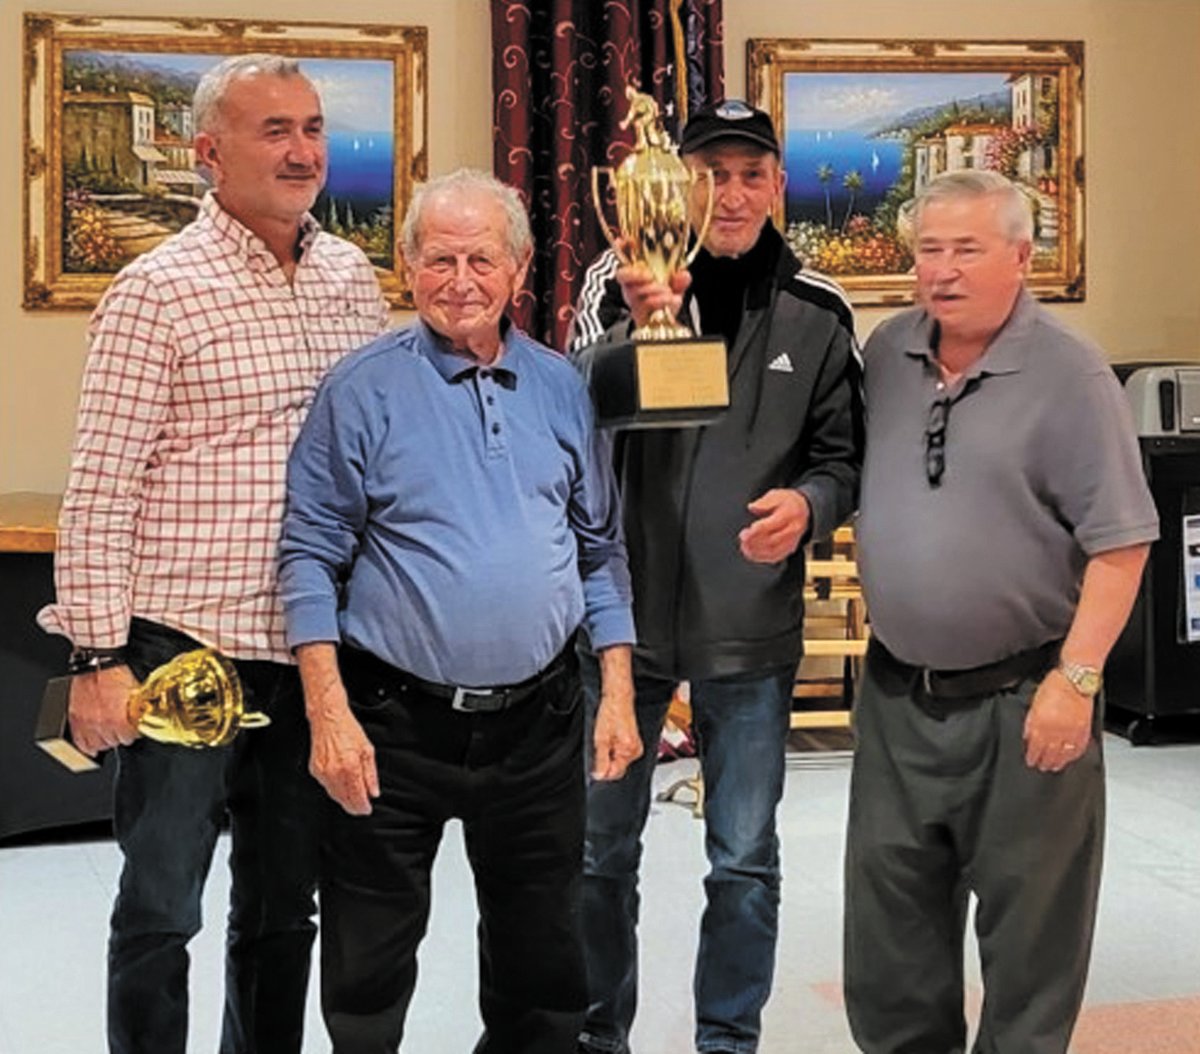 OCEAN STATE BOCCI LEADERS: The night’s big bocce trophy was for the Rhode Island statewide winners. The Terminators from the Prata Society, managed by Gaetano Cozzi, also included players Raffaele Laurenza, Gaetano Babelli, Angelo Riccio, and Frank DiLanna. (Photo courtesy Louis Spremulli)